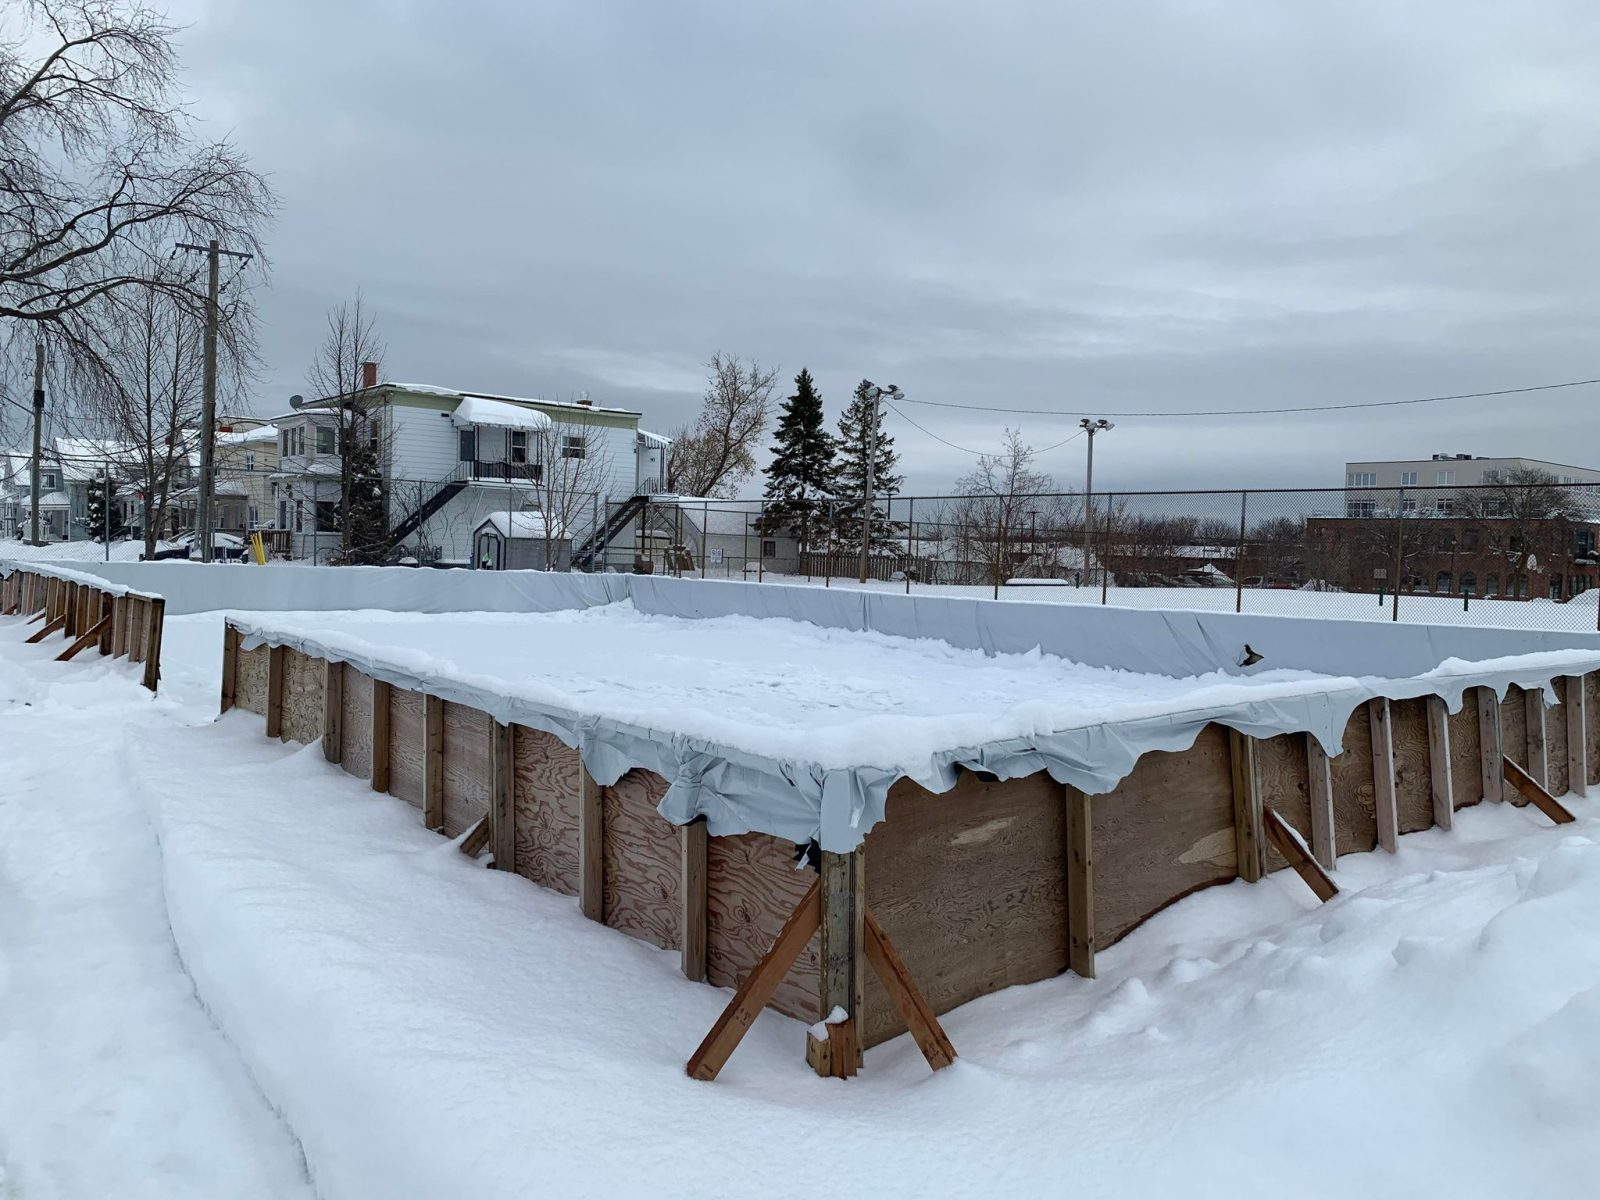 Outdoor Skating Rinks – Will They Open?